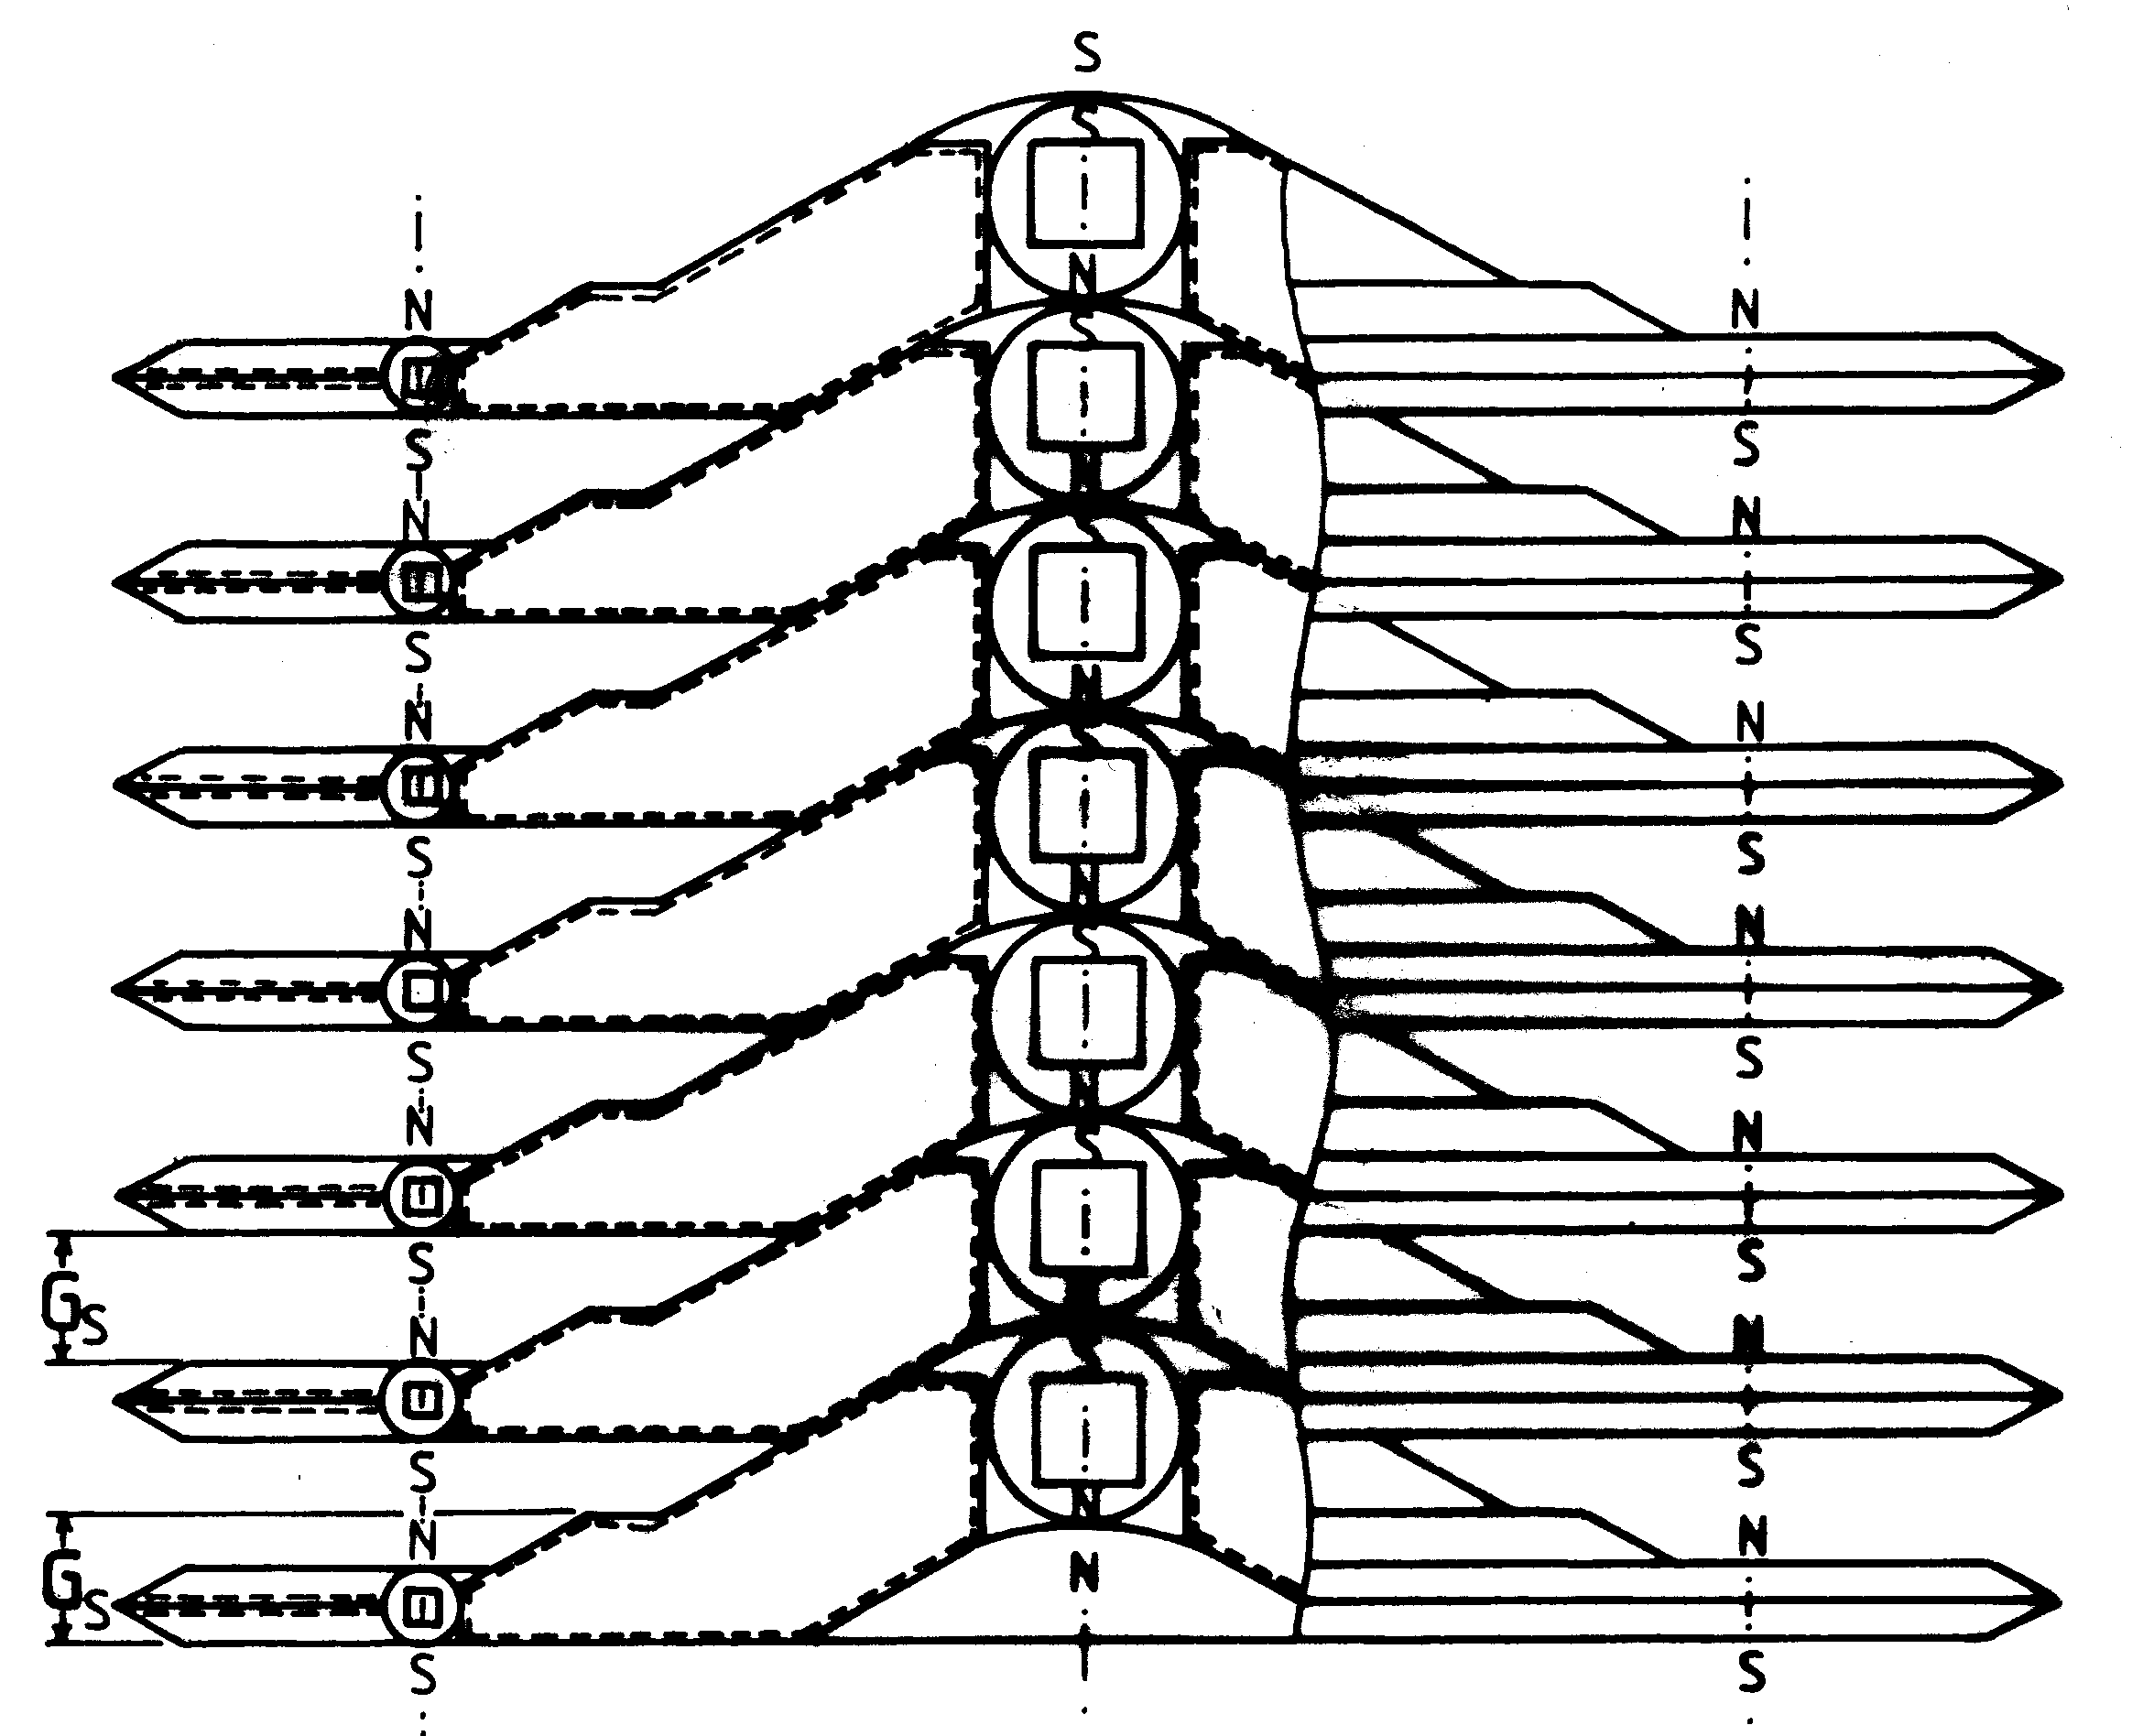 Fig. #3b (down): A stack of 7 UFOs type K6 - a vertical cross section